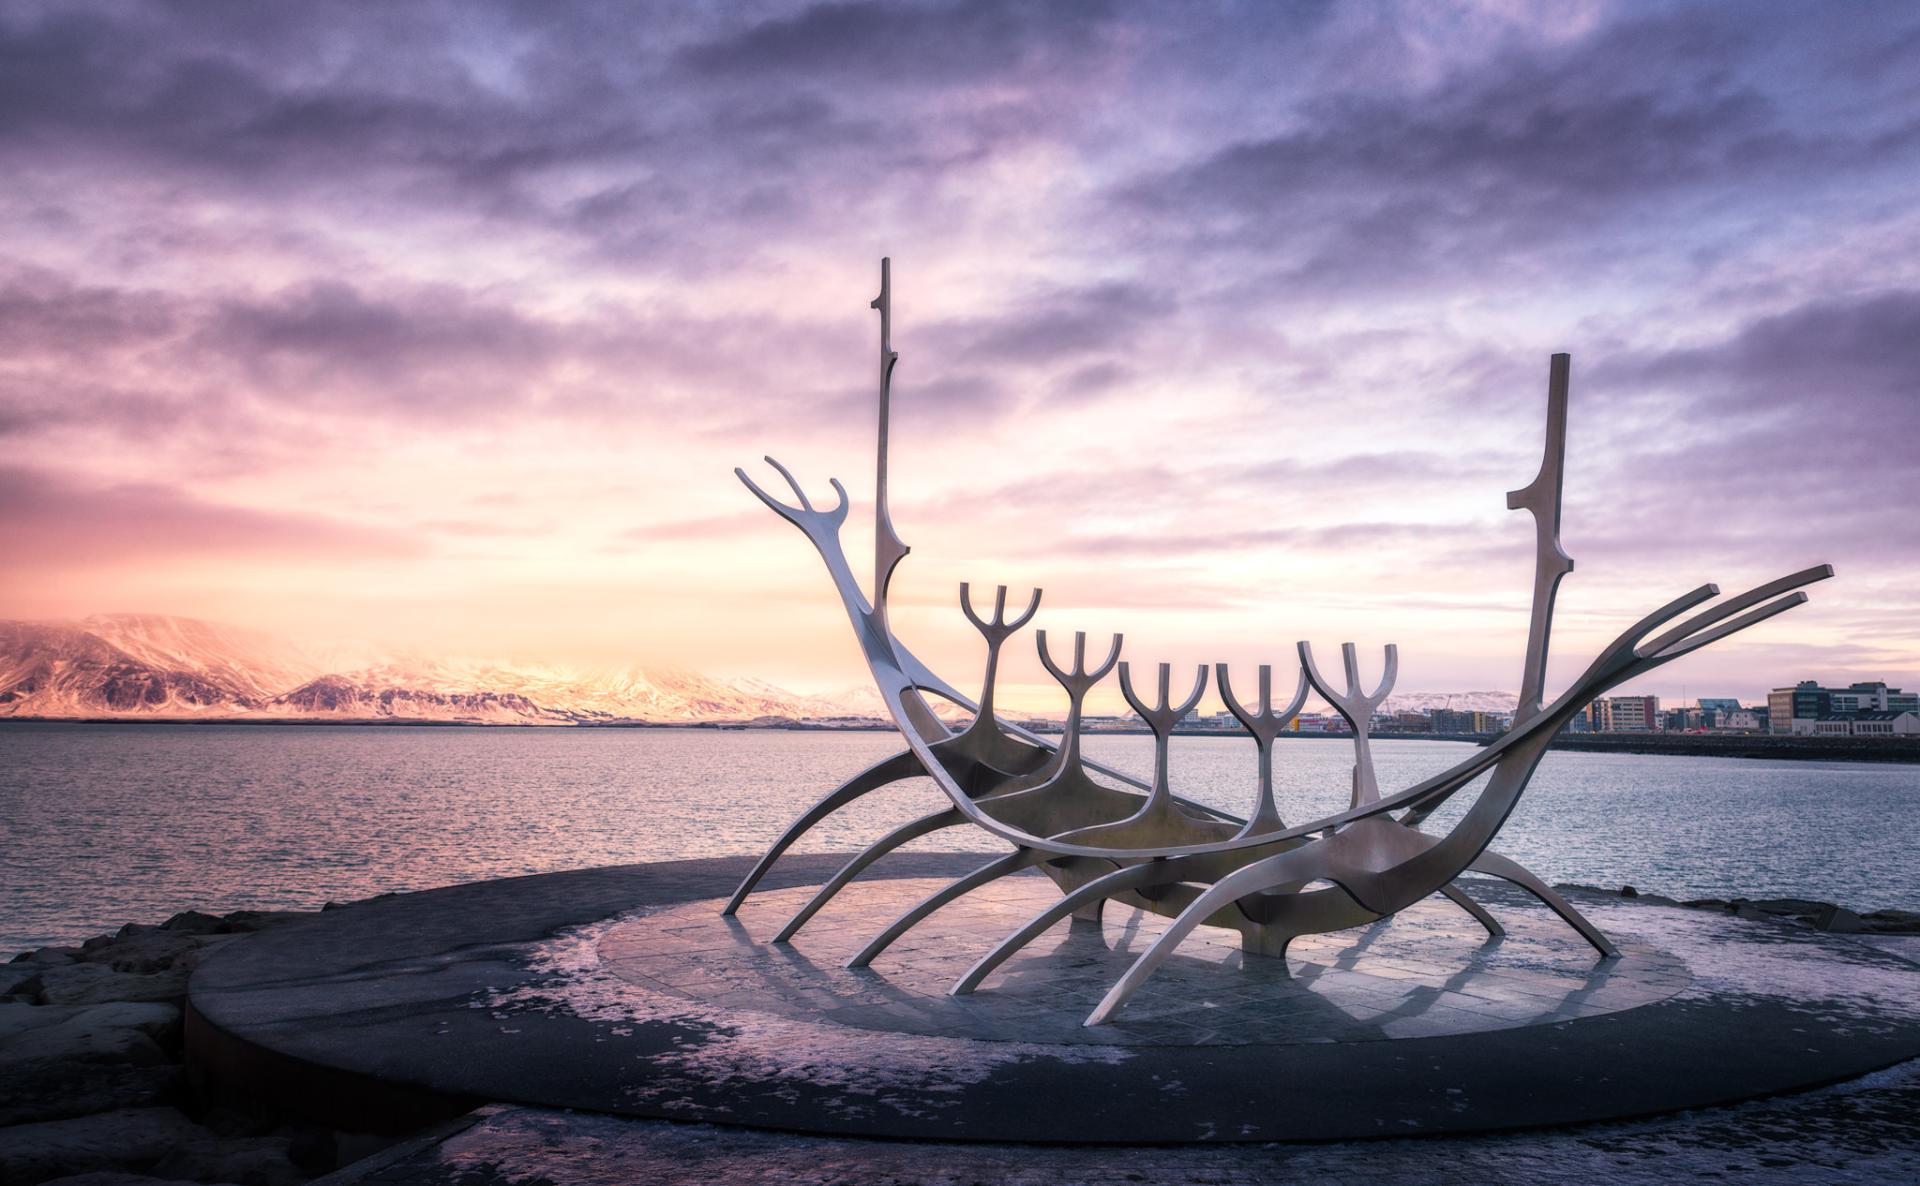 European Photography Awards Winner - Sun Voyager: Homage to the Promise of Undiscovered Land